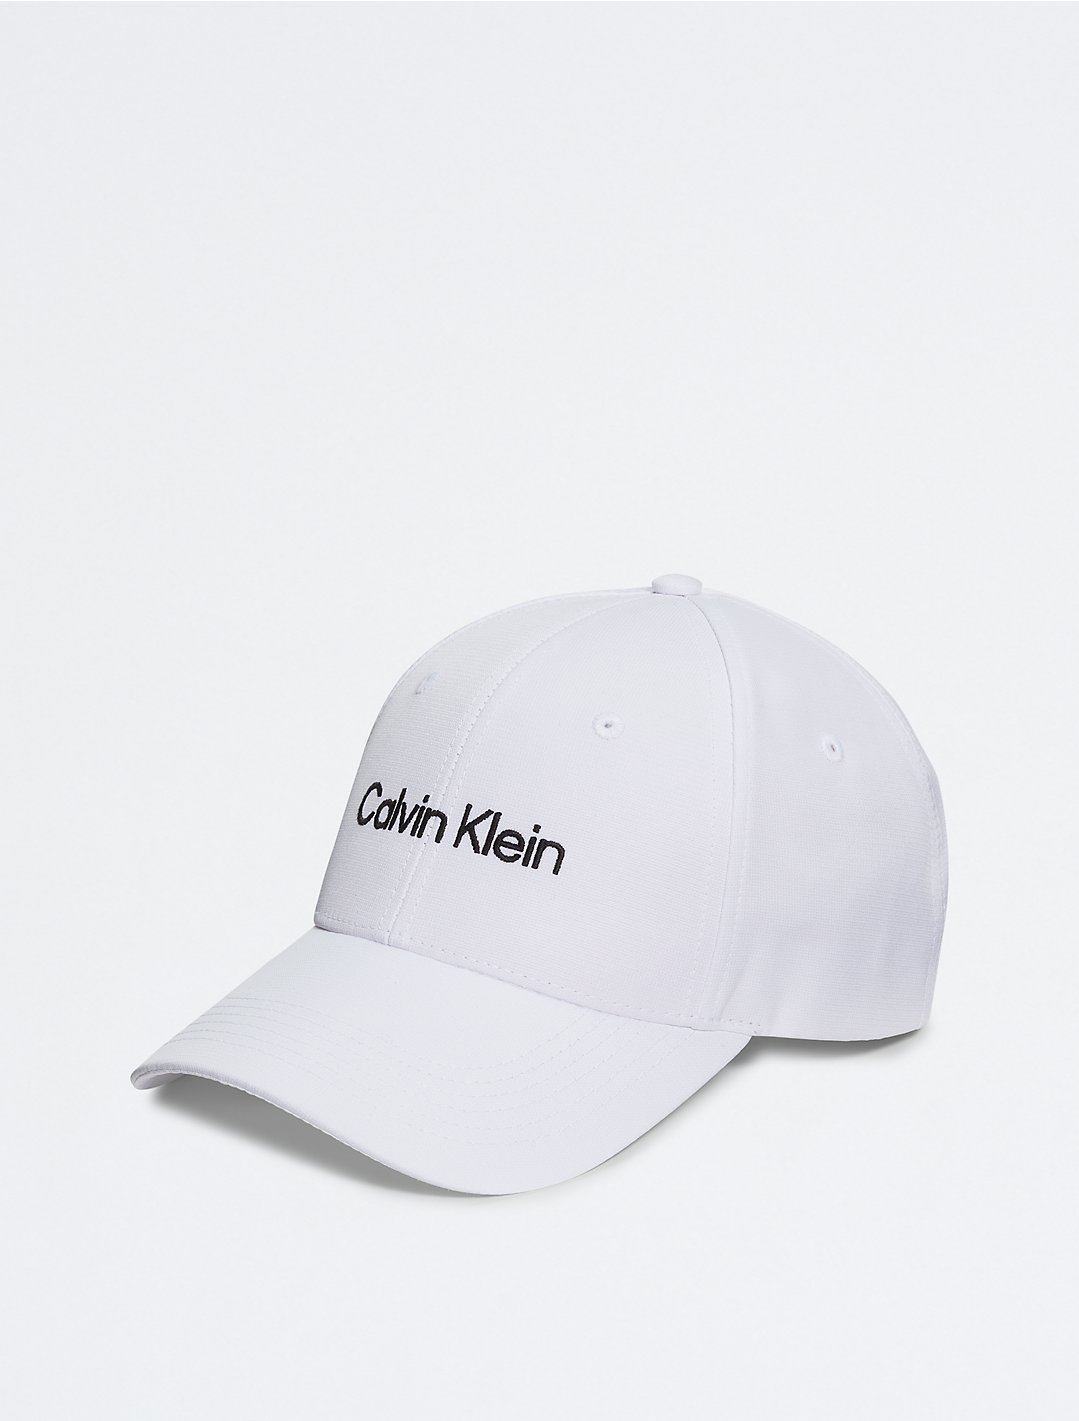 aan de andere kant, Land Huisje Recycled Polyester Logo Embroidery Baseball Cap | Calvin Klein